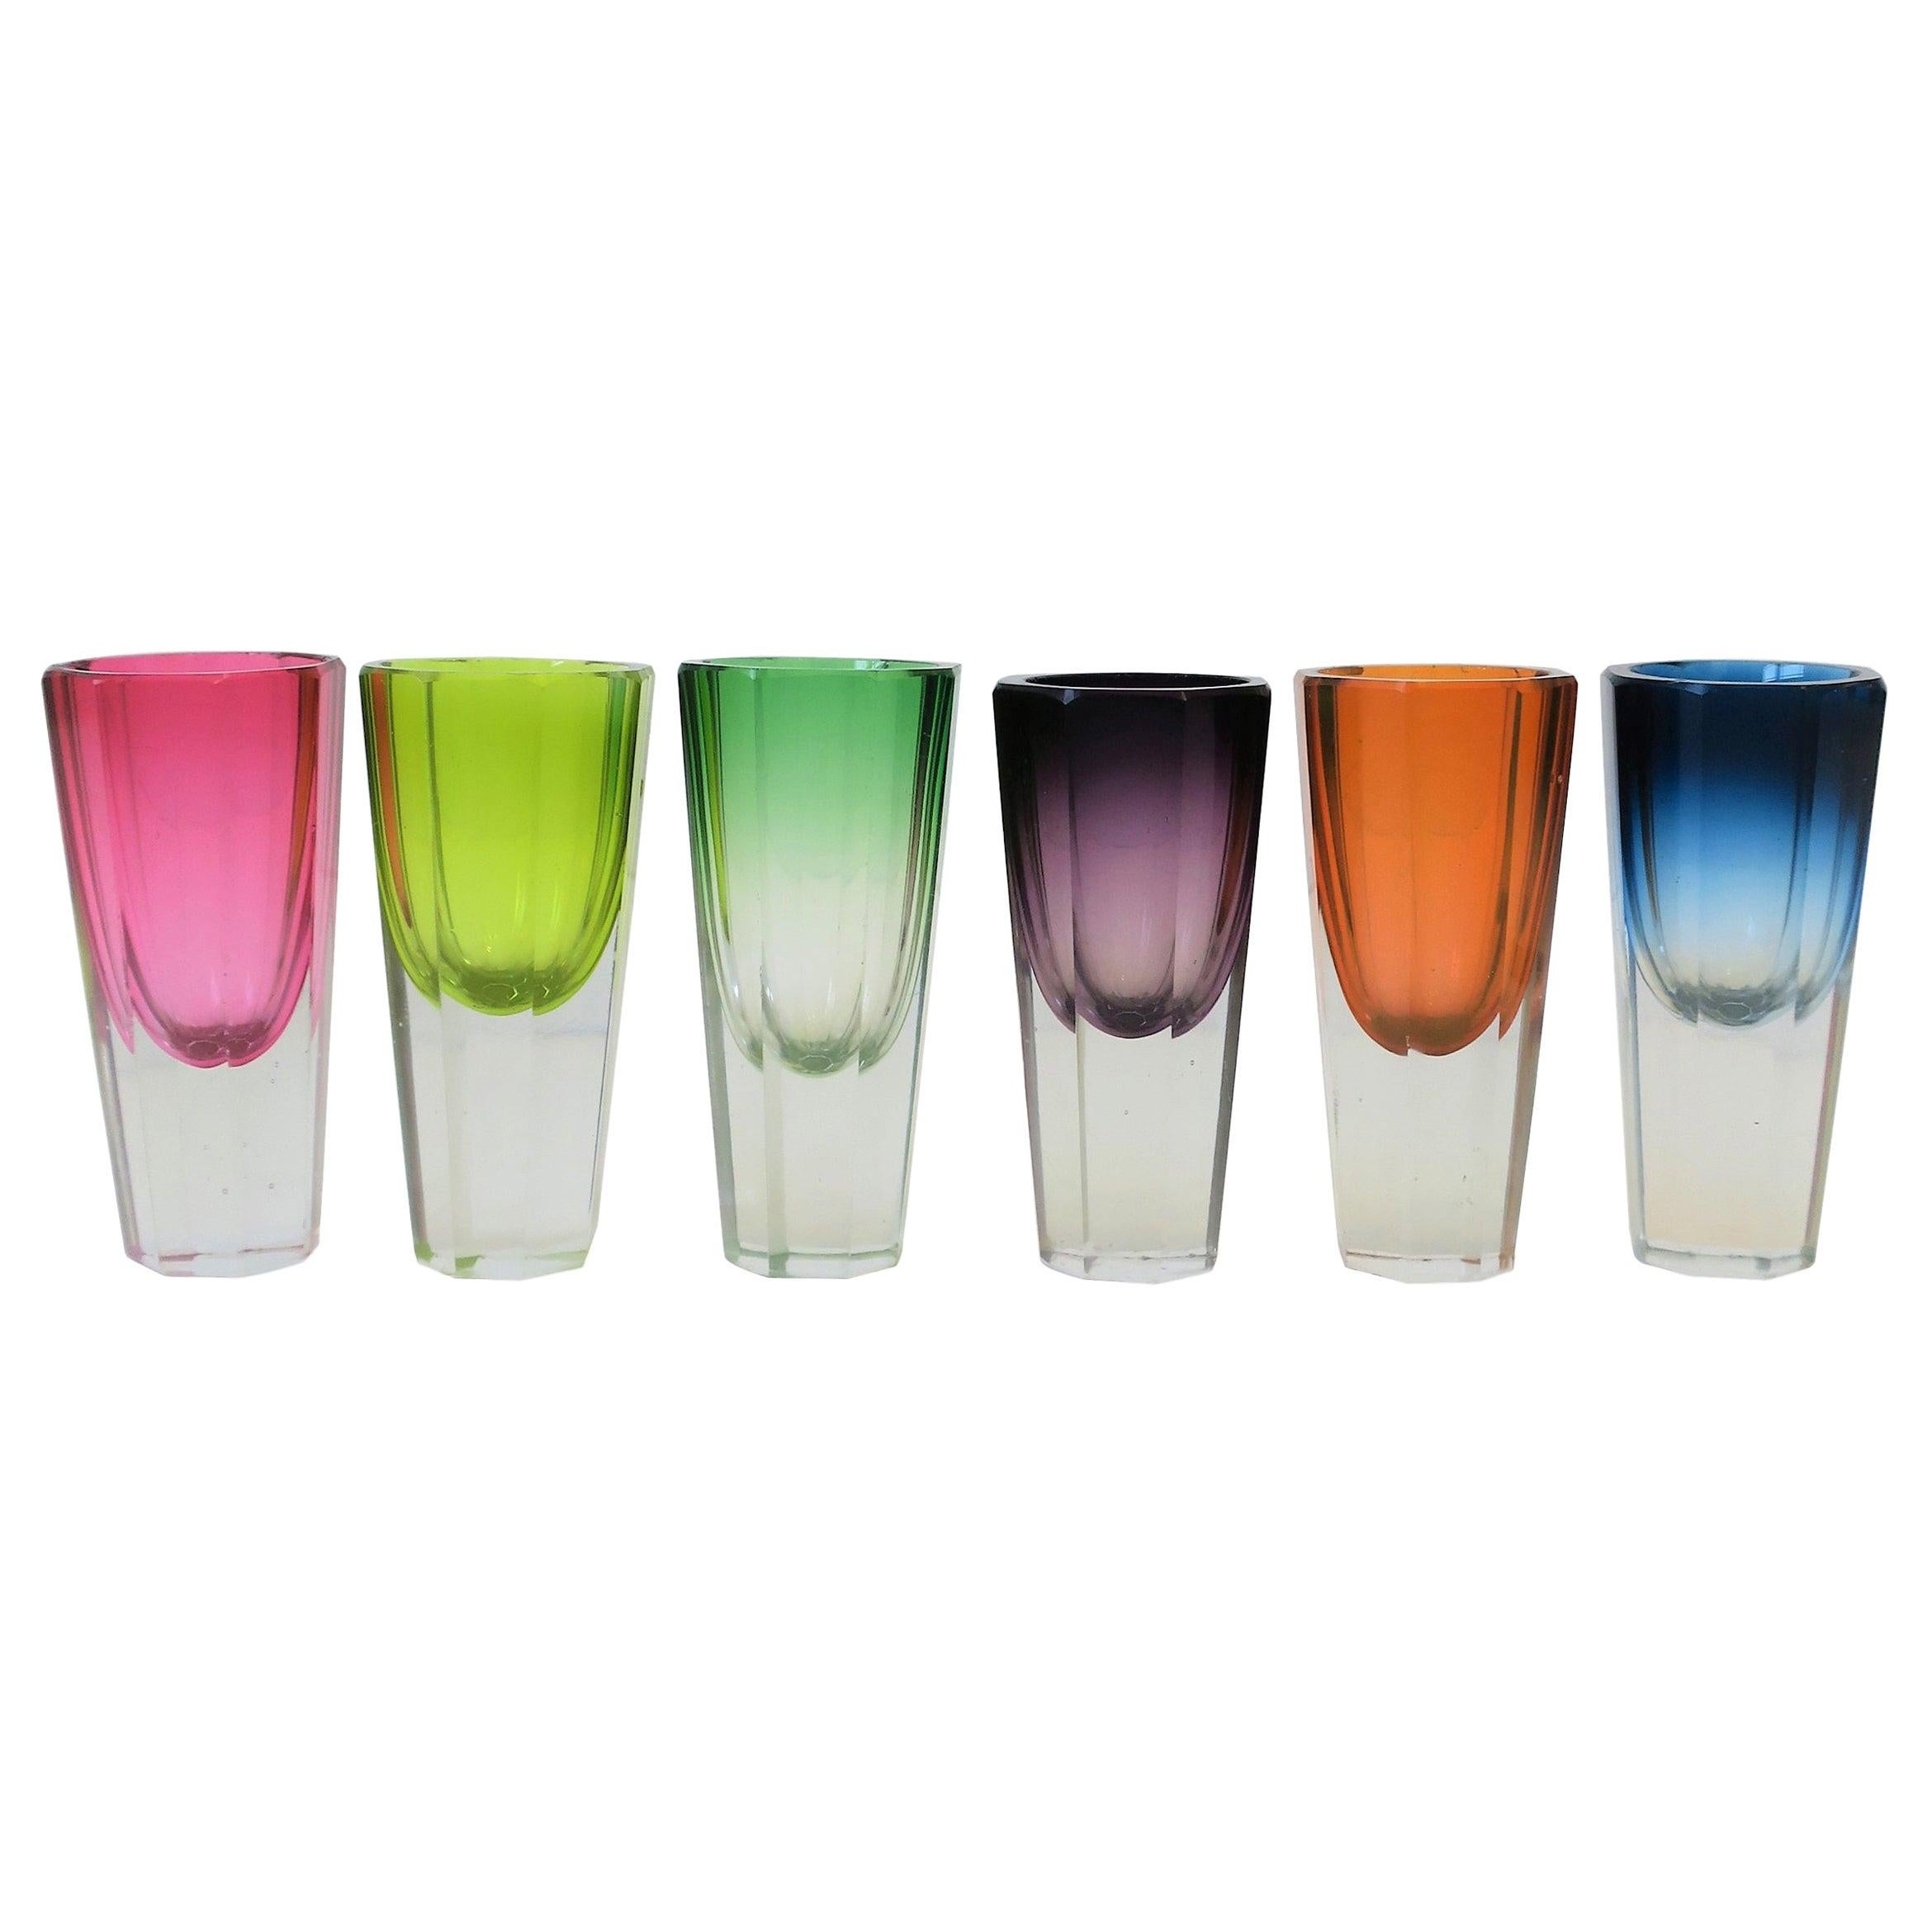 PC Consolidated Listing 2, 4 Fine Glassware Listings